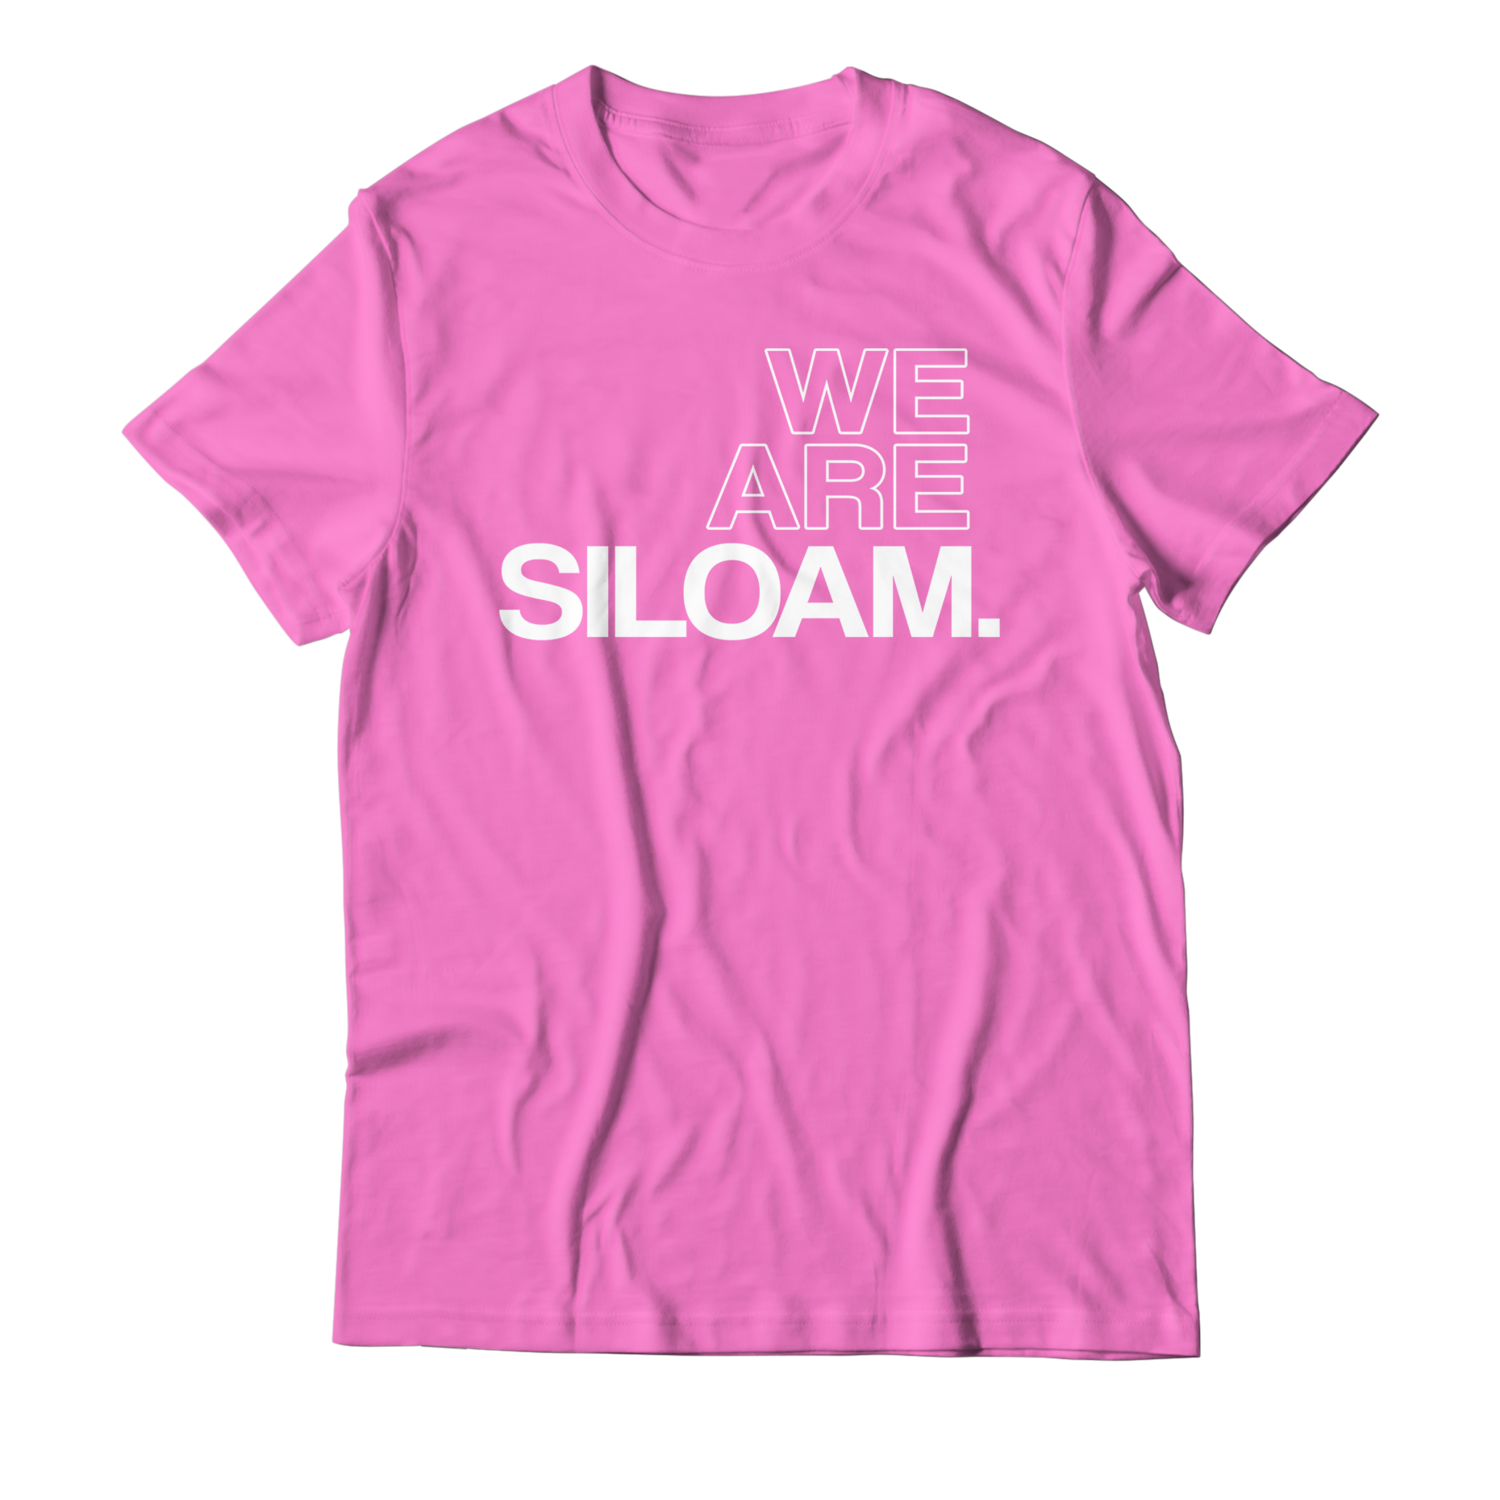 We Are Siloam T-shirt - Pink & White